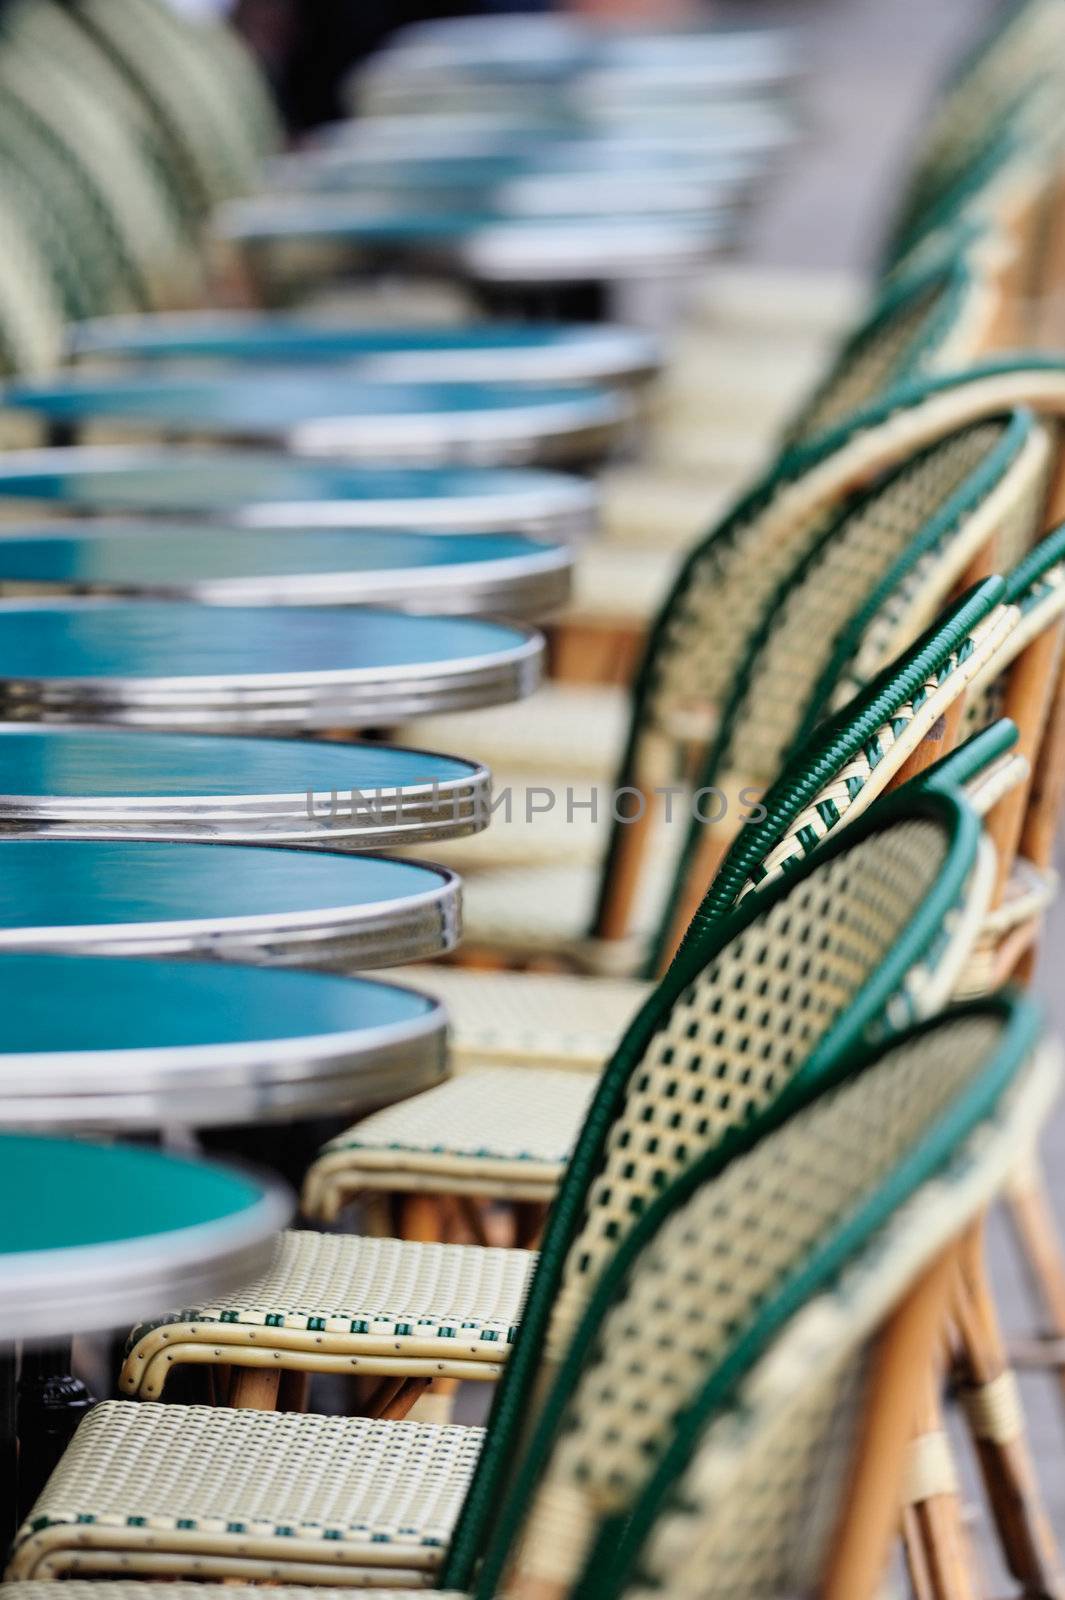 Several round tables and chairs in cafe in Paris. Photo with tilt-shift effect